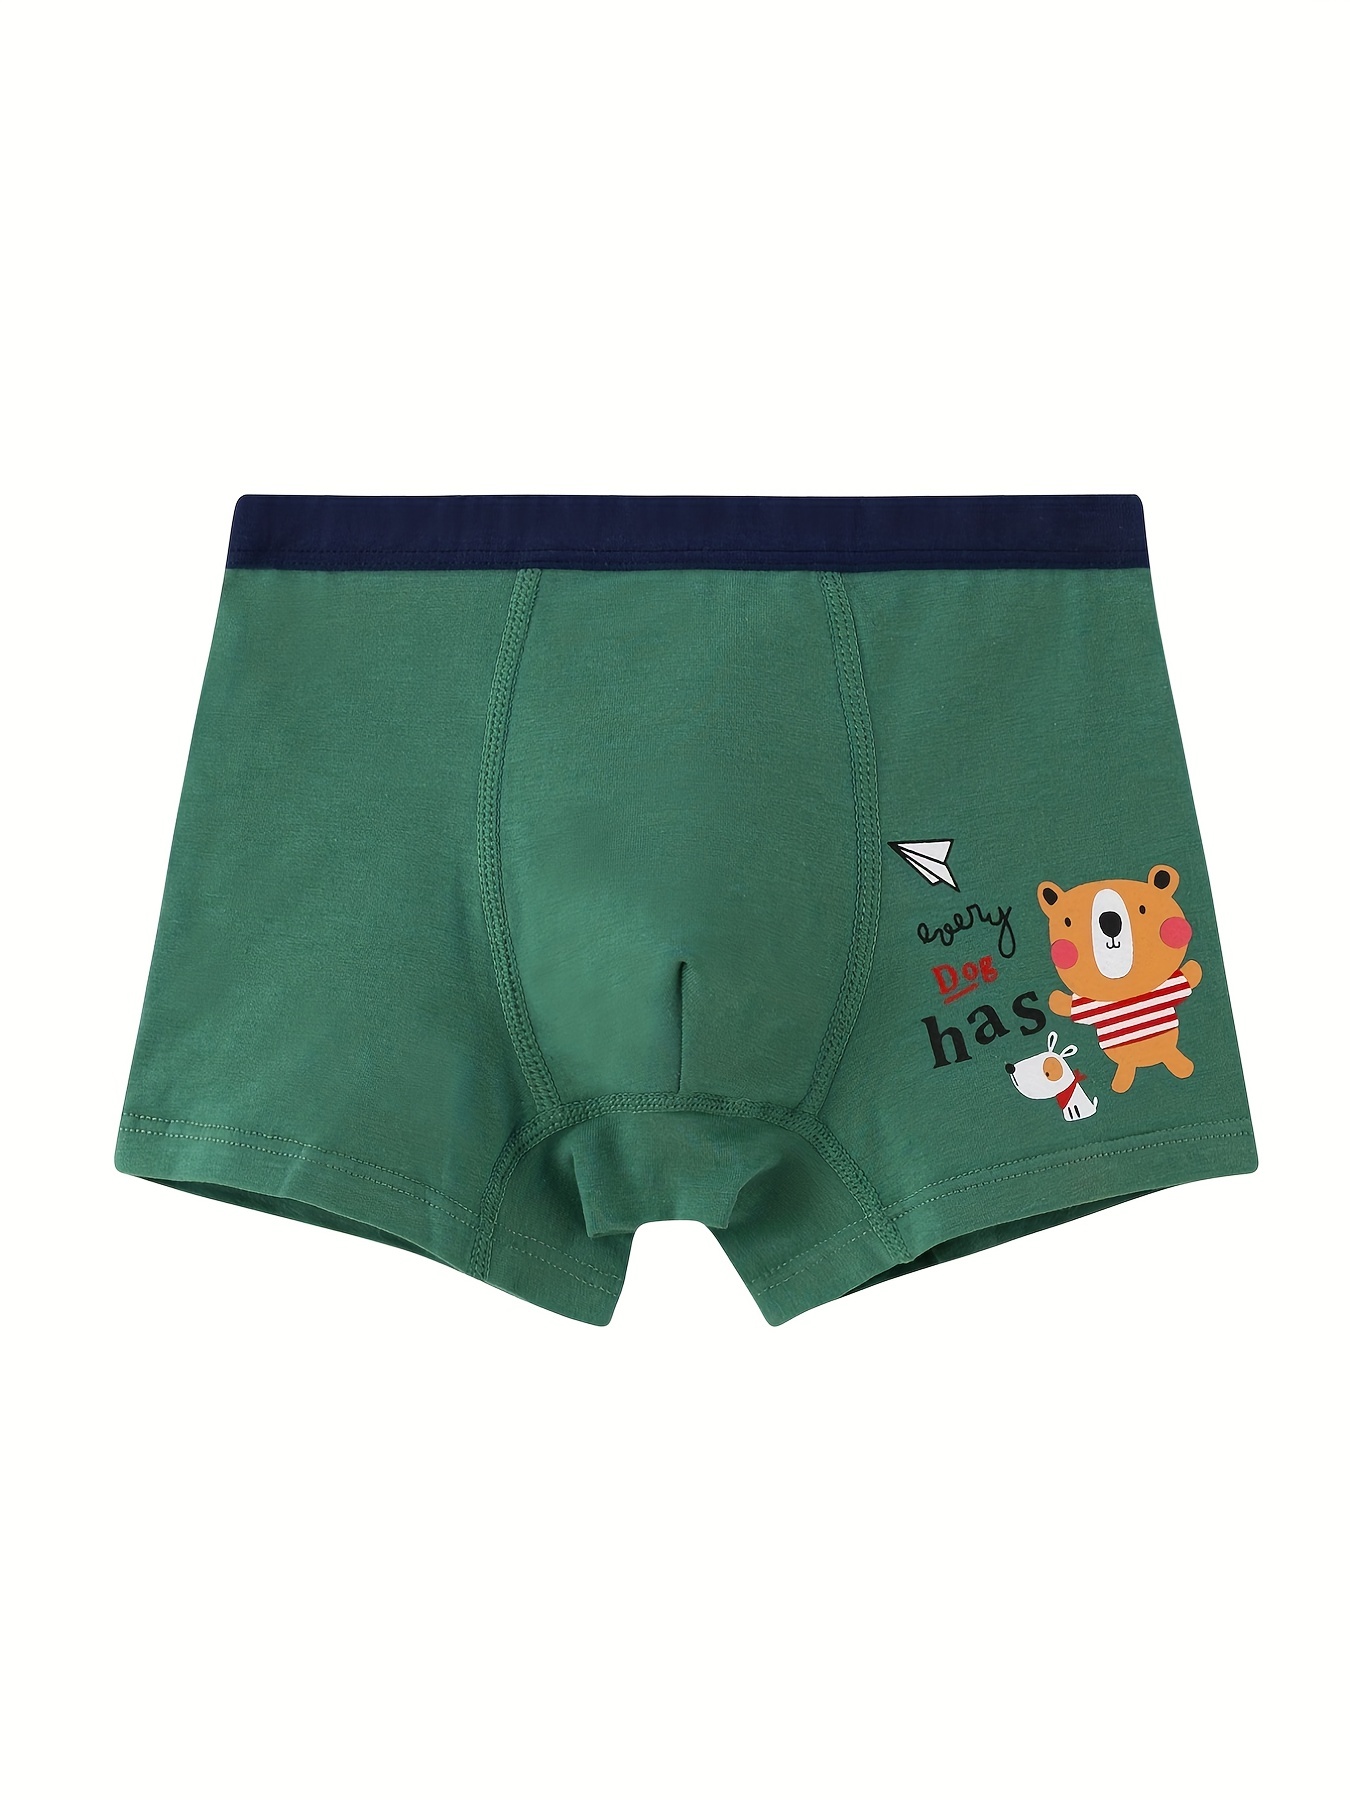 Soft male elephant underwear For Comfort 